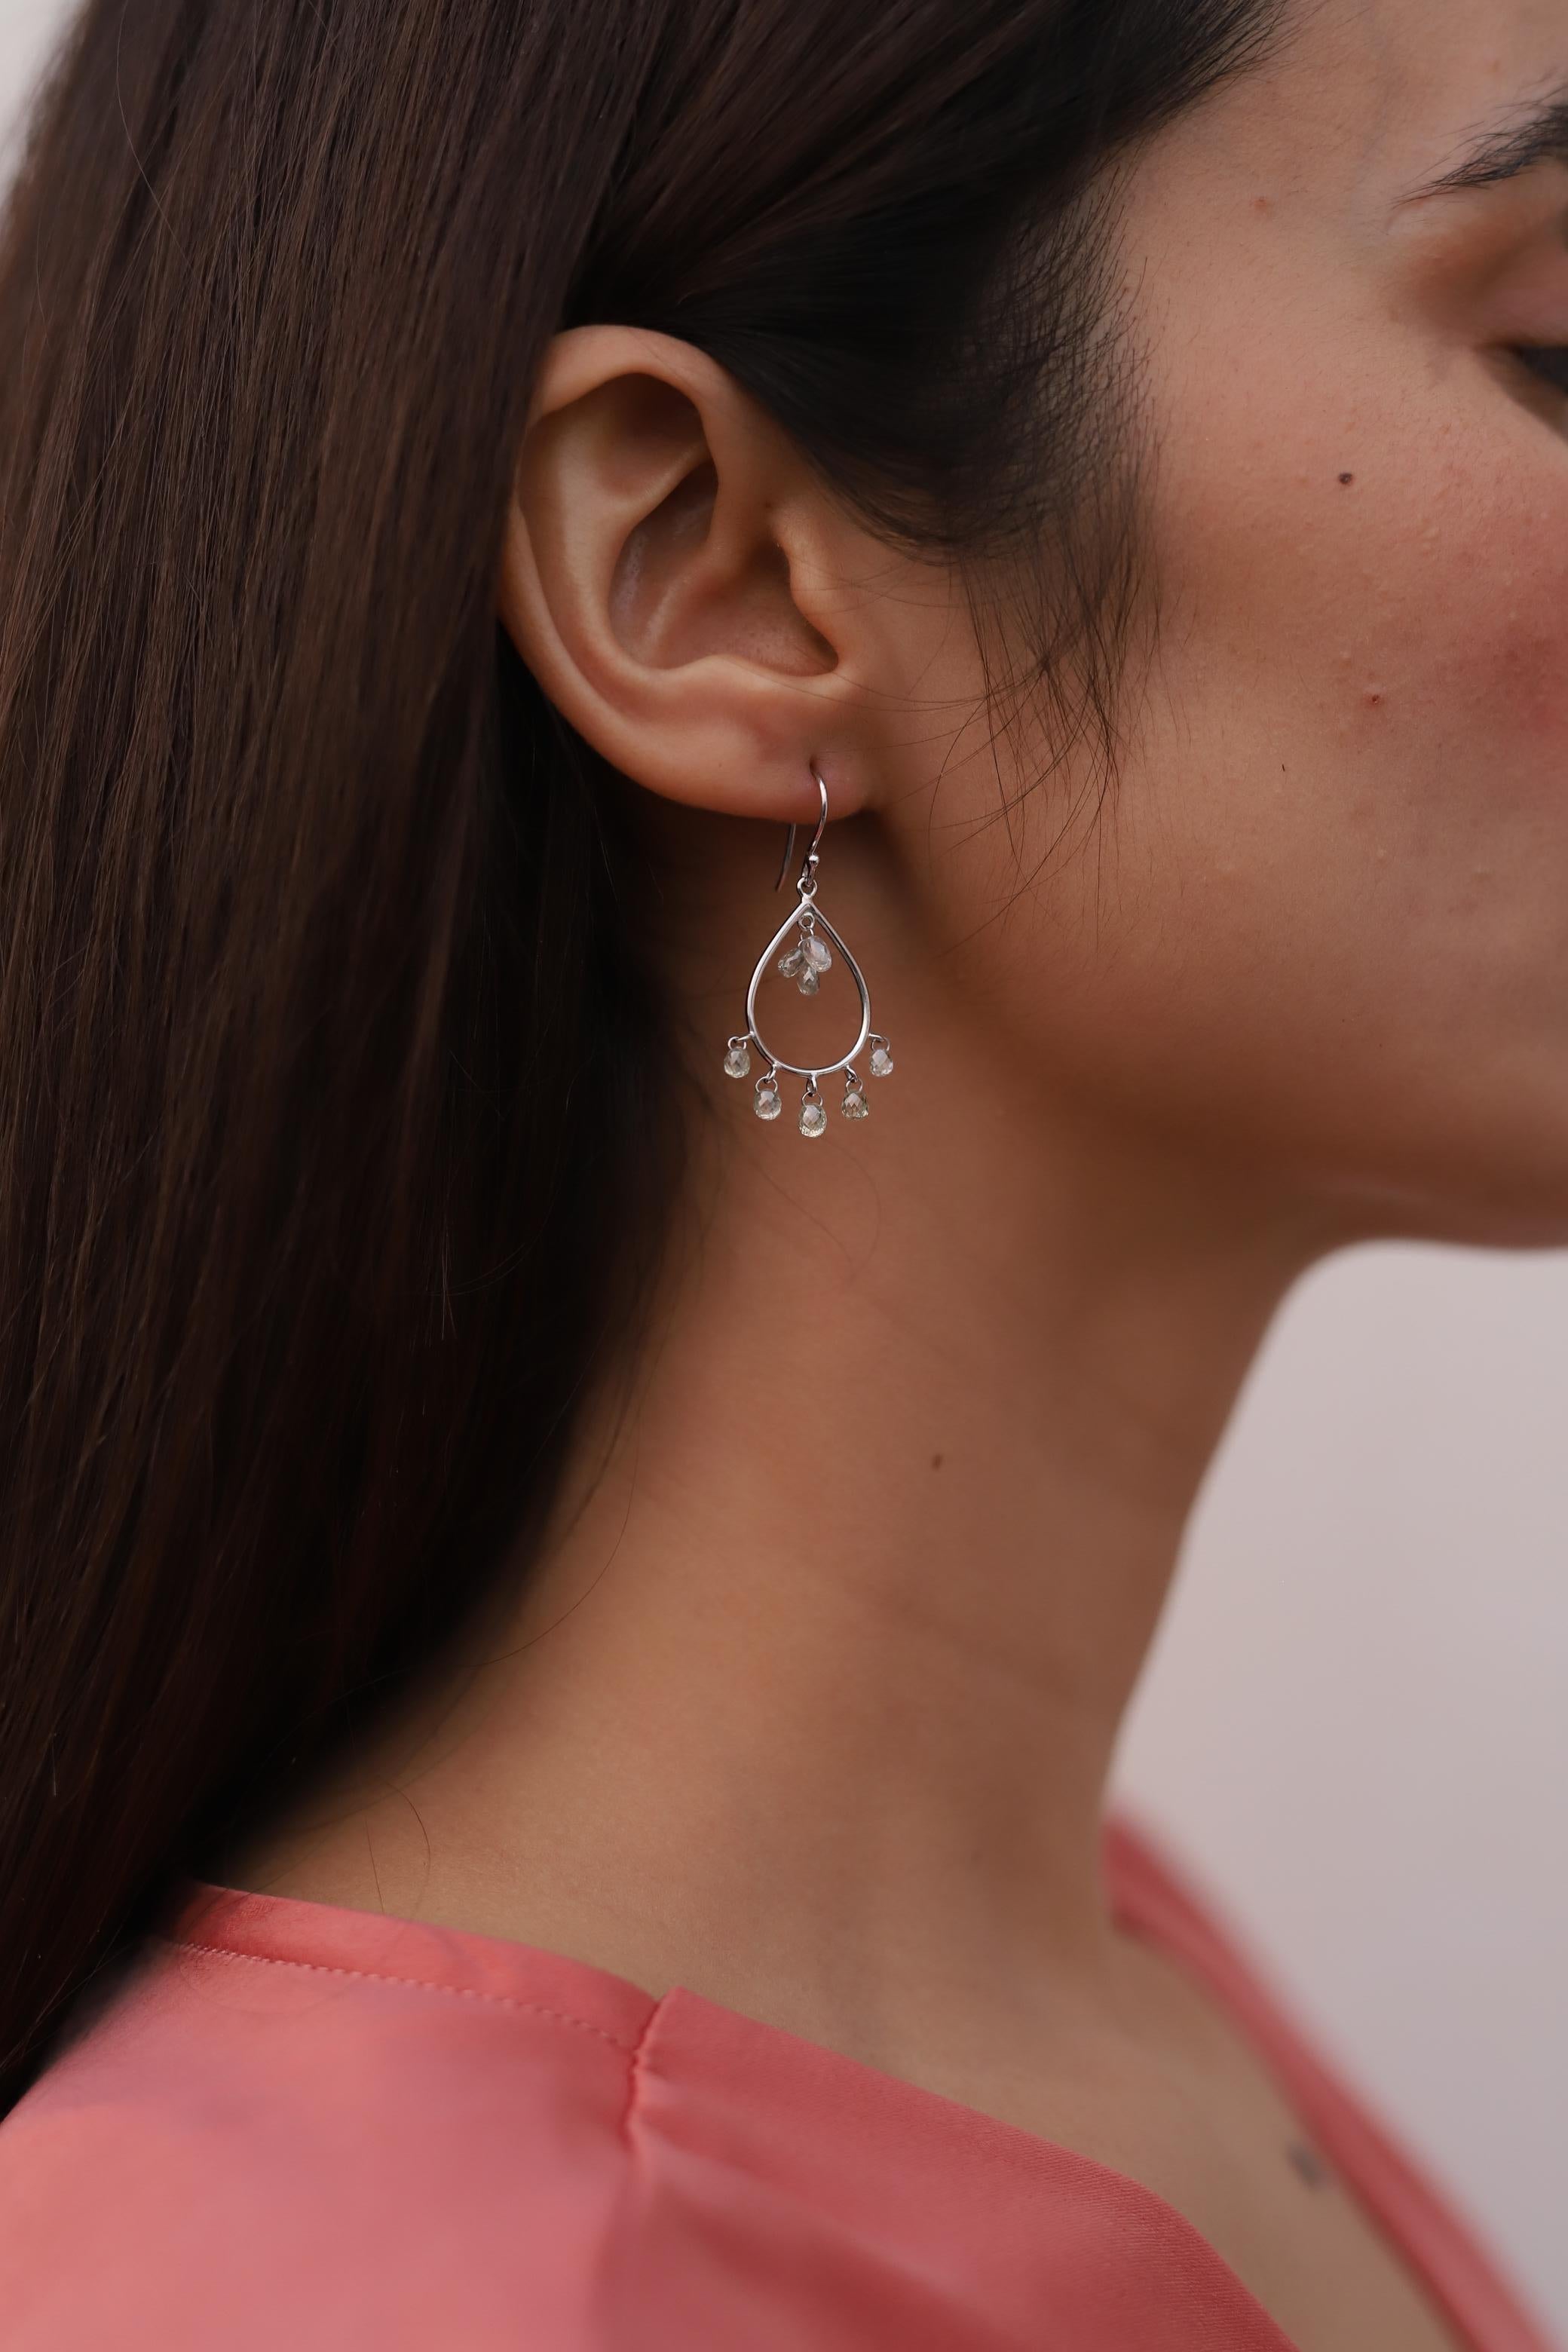 3.30 Carat Diamond Dangle Earrings in 18K Gold to make a statement with your look. You shall need dangle earrings to make a statement with your look. These earrings create a sparkling, luxurious look featuring diamond beads.
April birthstone diamond